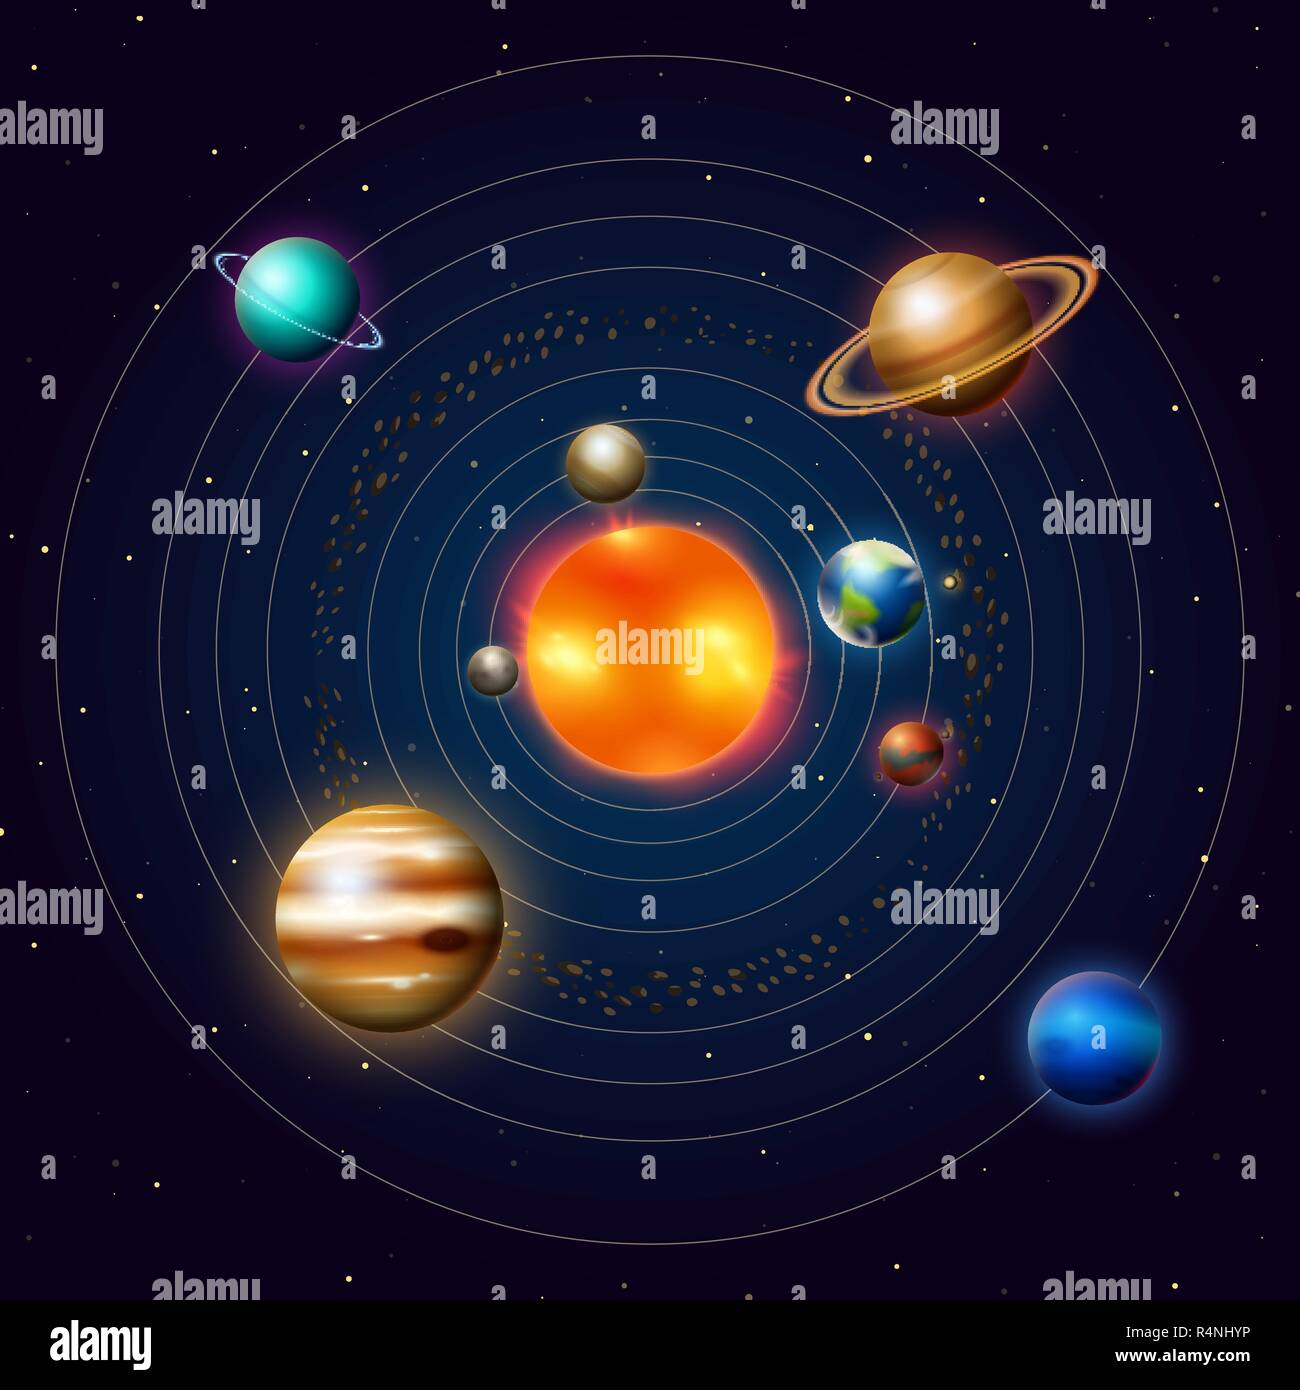 Planets of the solar system or model in orbit. Milky Way. Space and astronomy, the infinite universe and the galaxy. Sphere Mars Venus Sun Earth Jupiter. Dark background for your design. Stock Vector